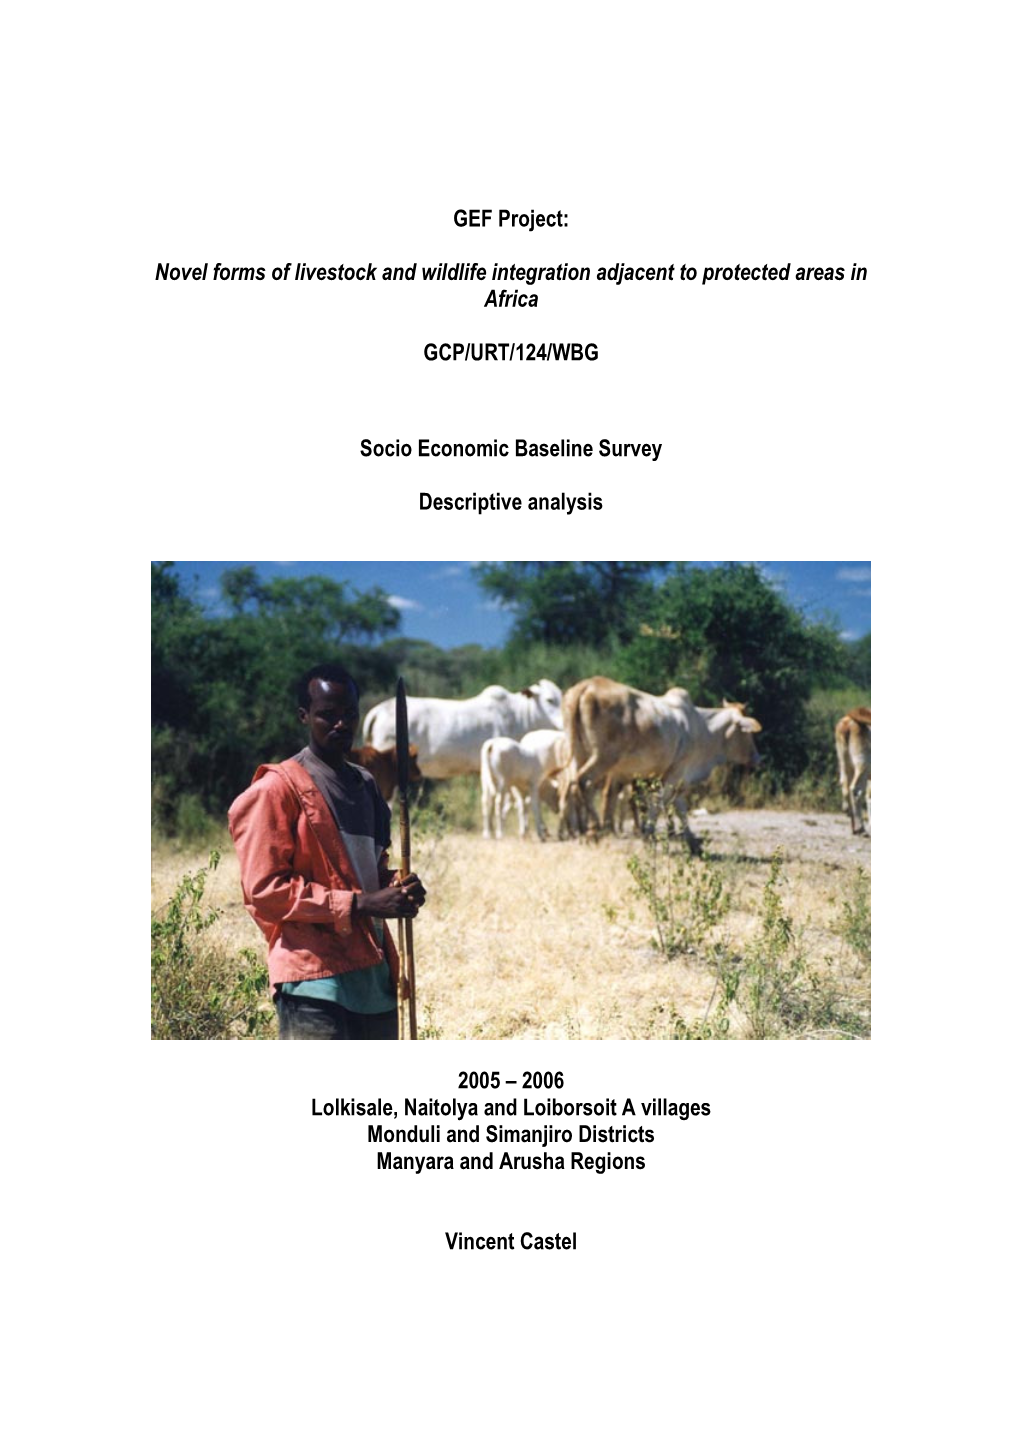 GEF Project: Novel Forms of Livestock and Wildlife Integration Adjacent to Protected Areas in Africa